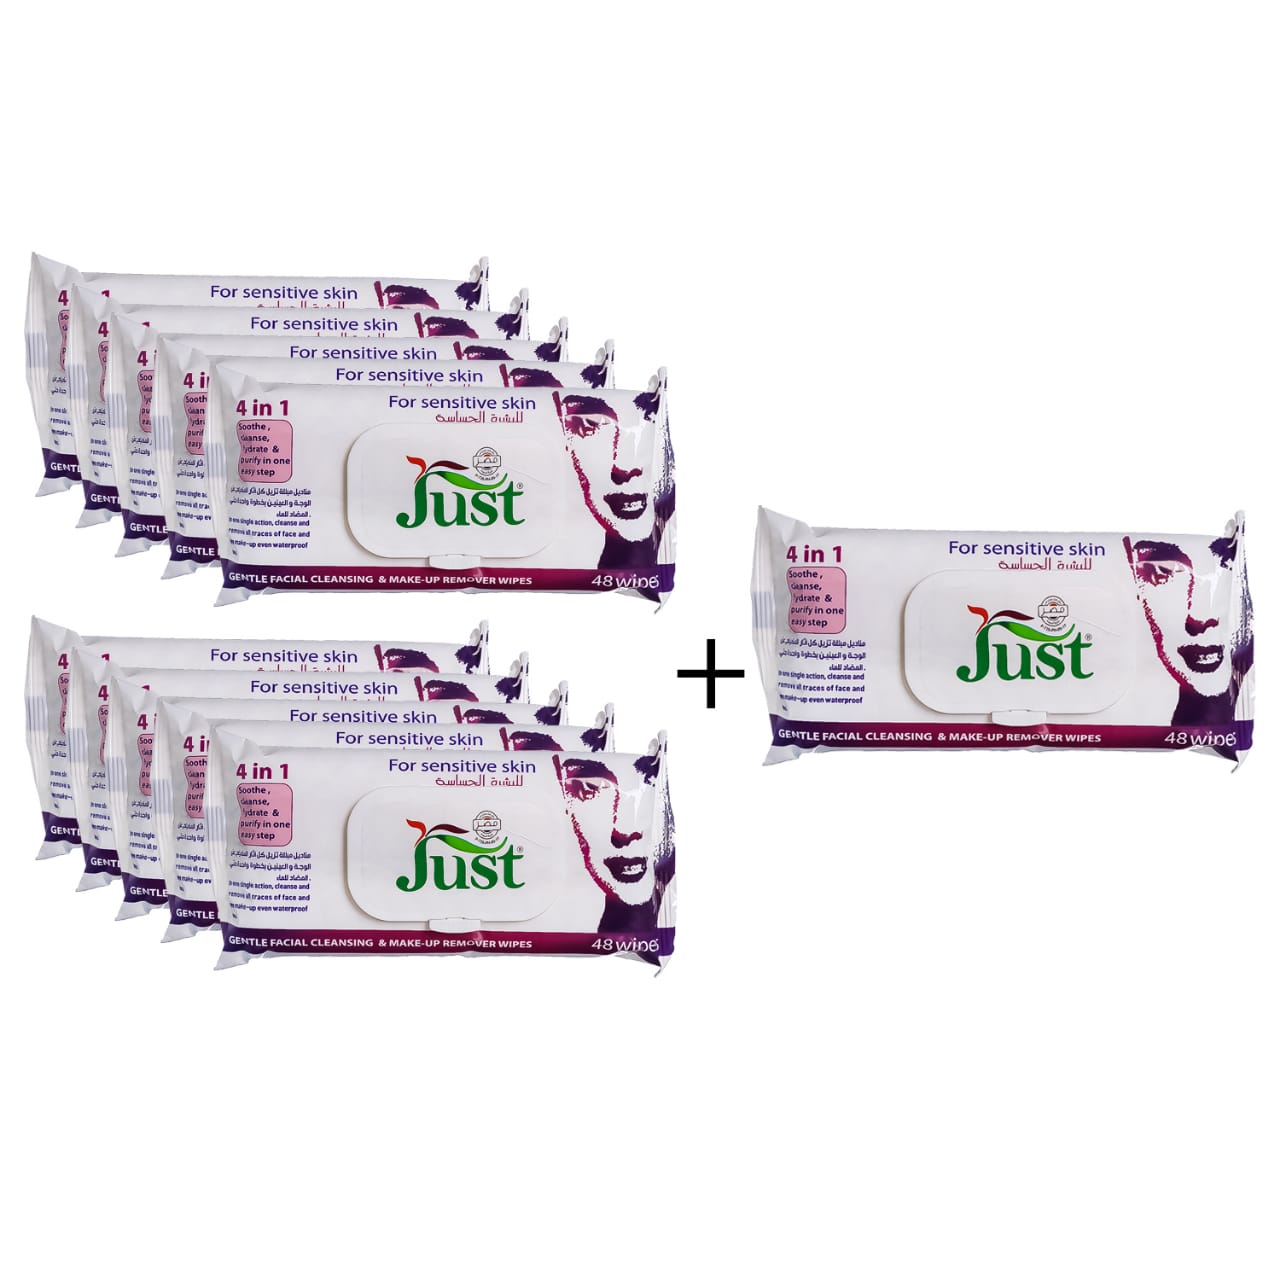 Just Make-Up Remover Wipes (48) Offer